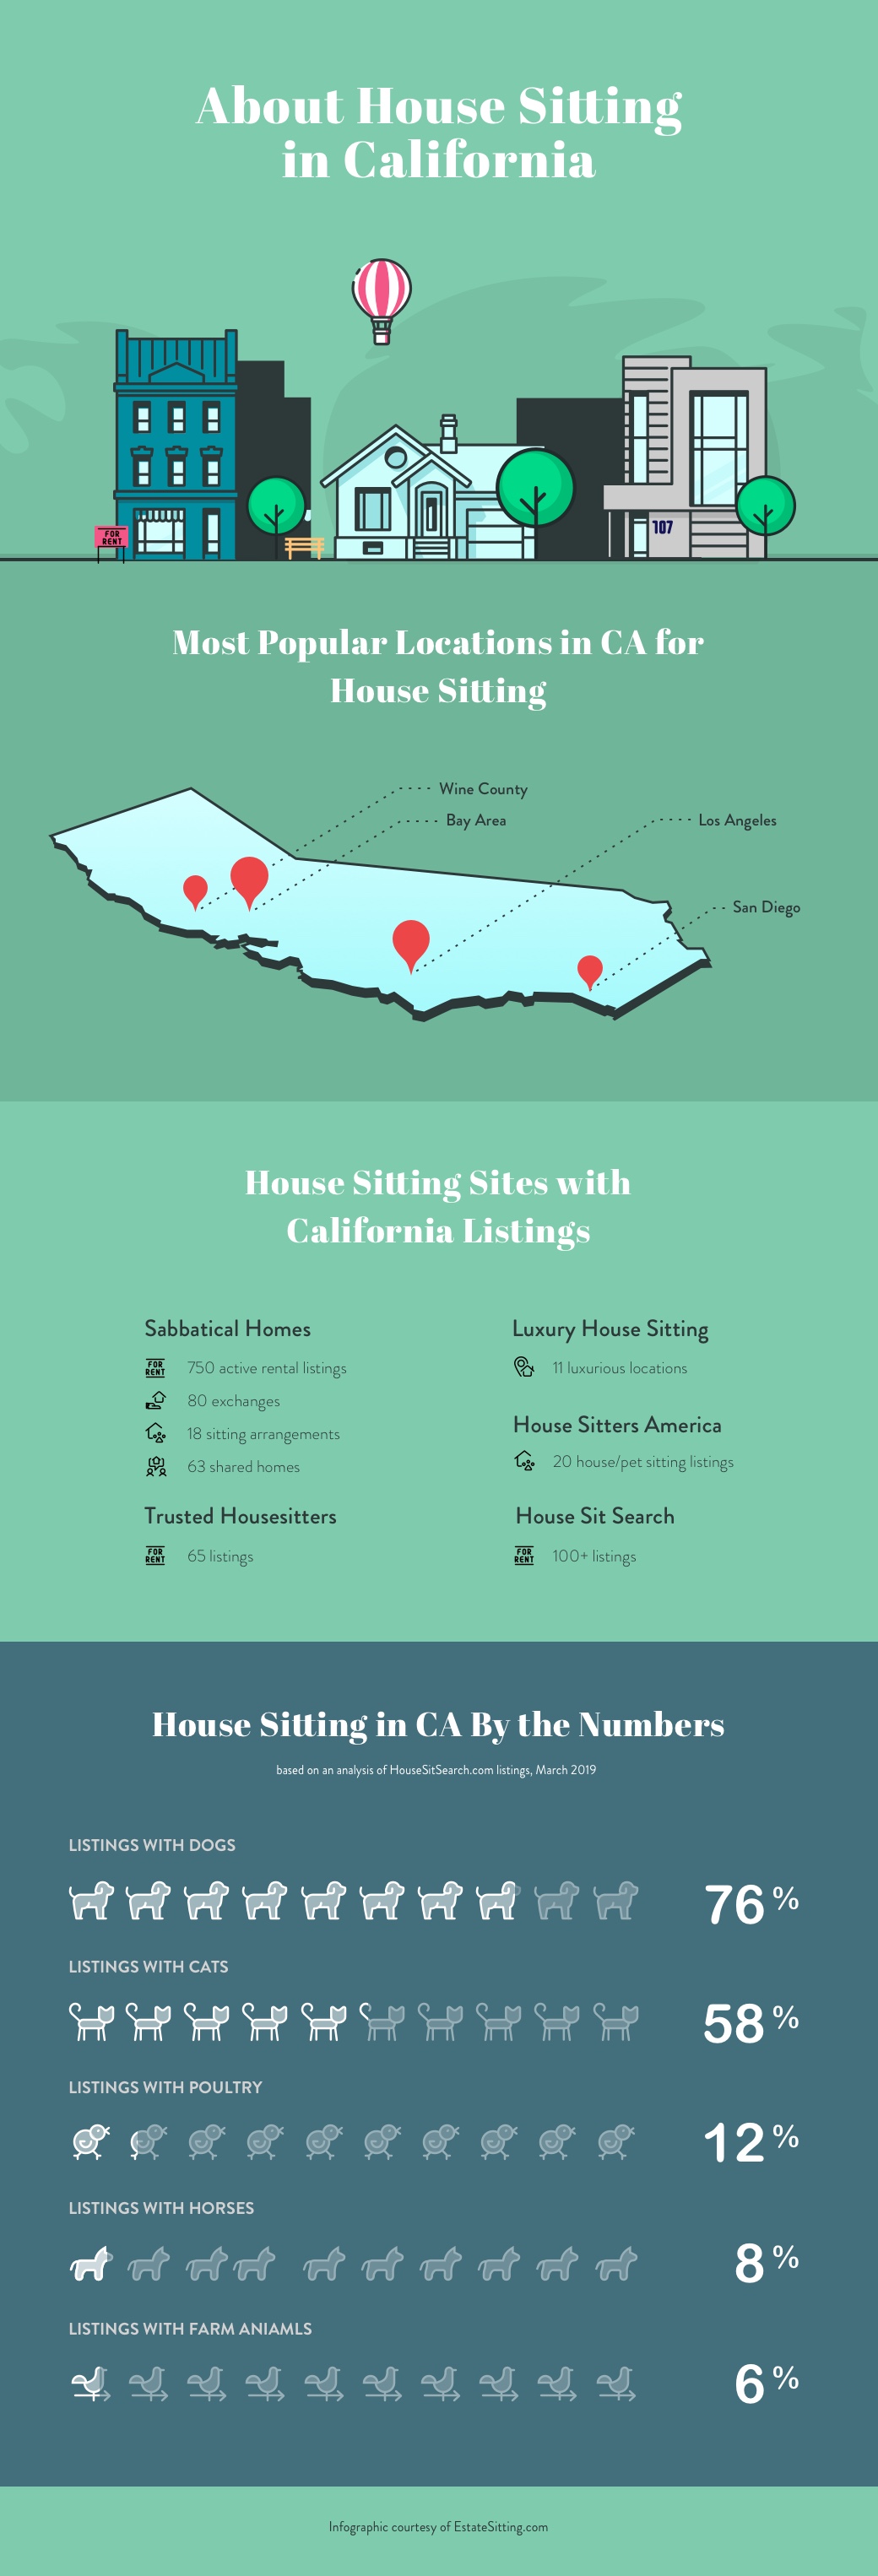 House Sitting in California Infographic  - most popular locations in CA for housesitting